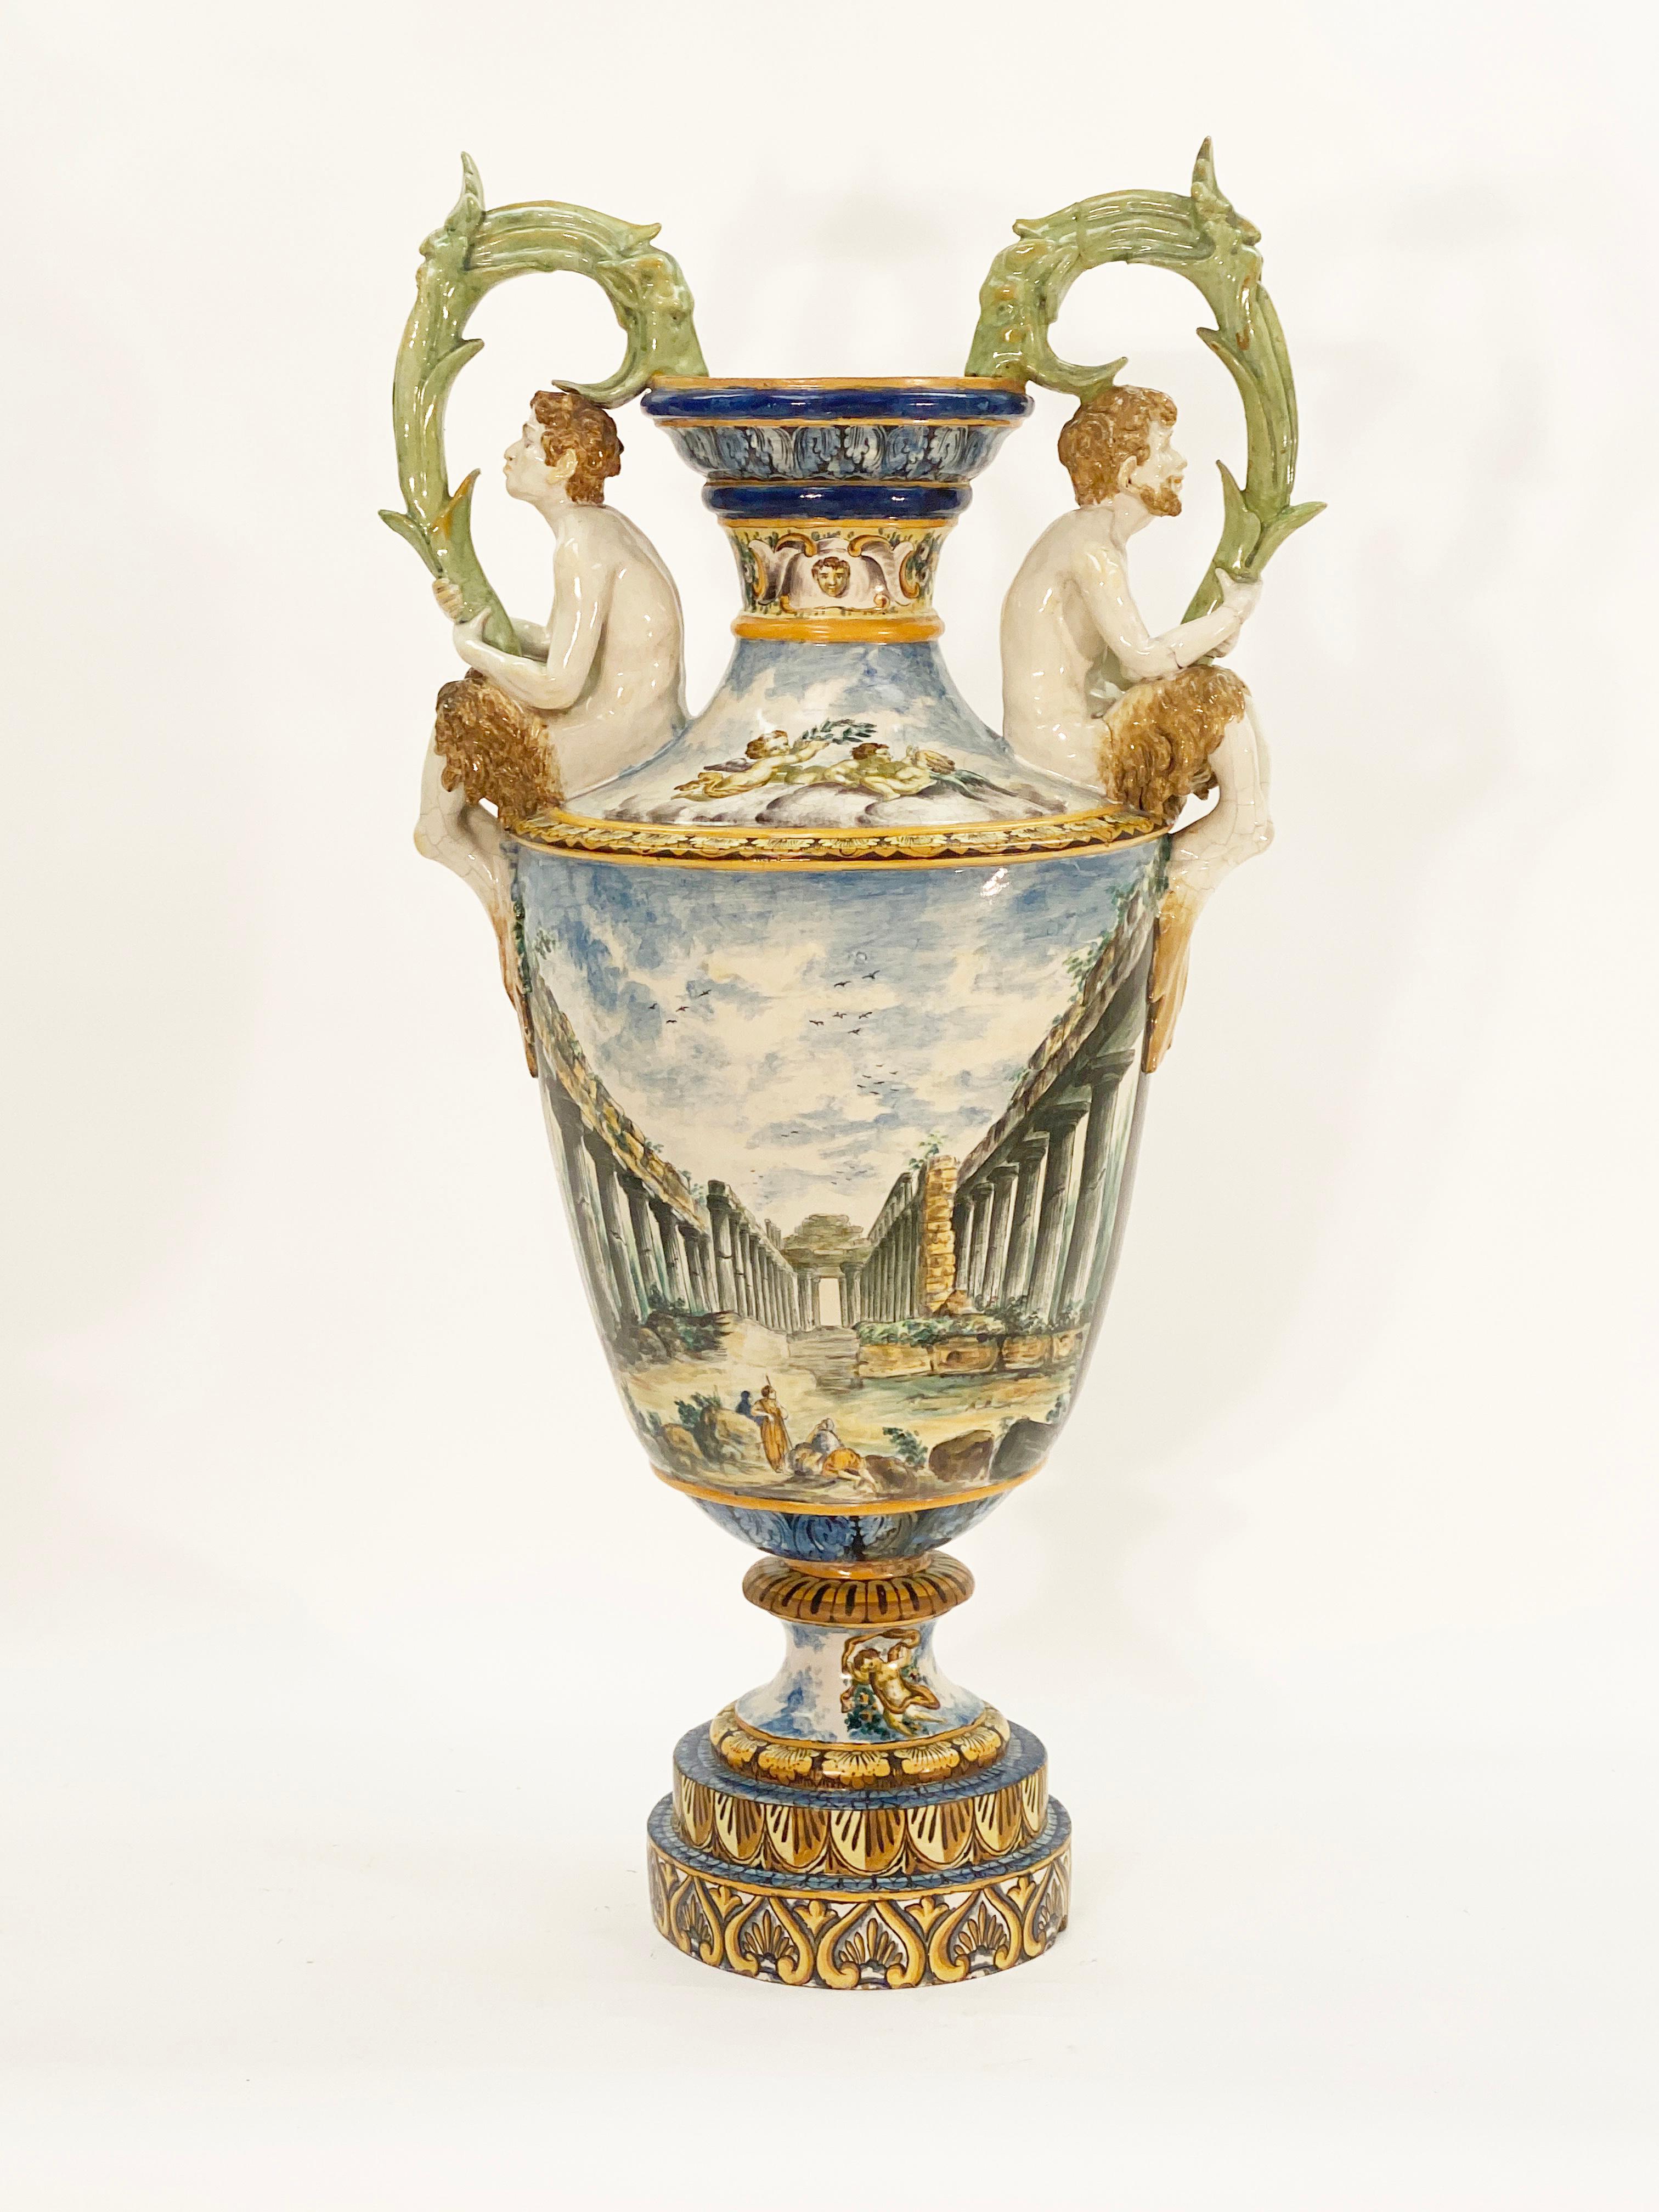 Monumental Italian Majolica porcelain figural floor urn. Decorated throughout with hand painted Classical Greek scenery. Two figural fawns on the opposing handles. Fine wear and cracks on the glazing that indicate age. 

Italian circa